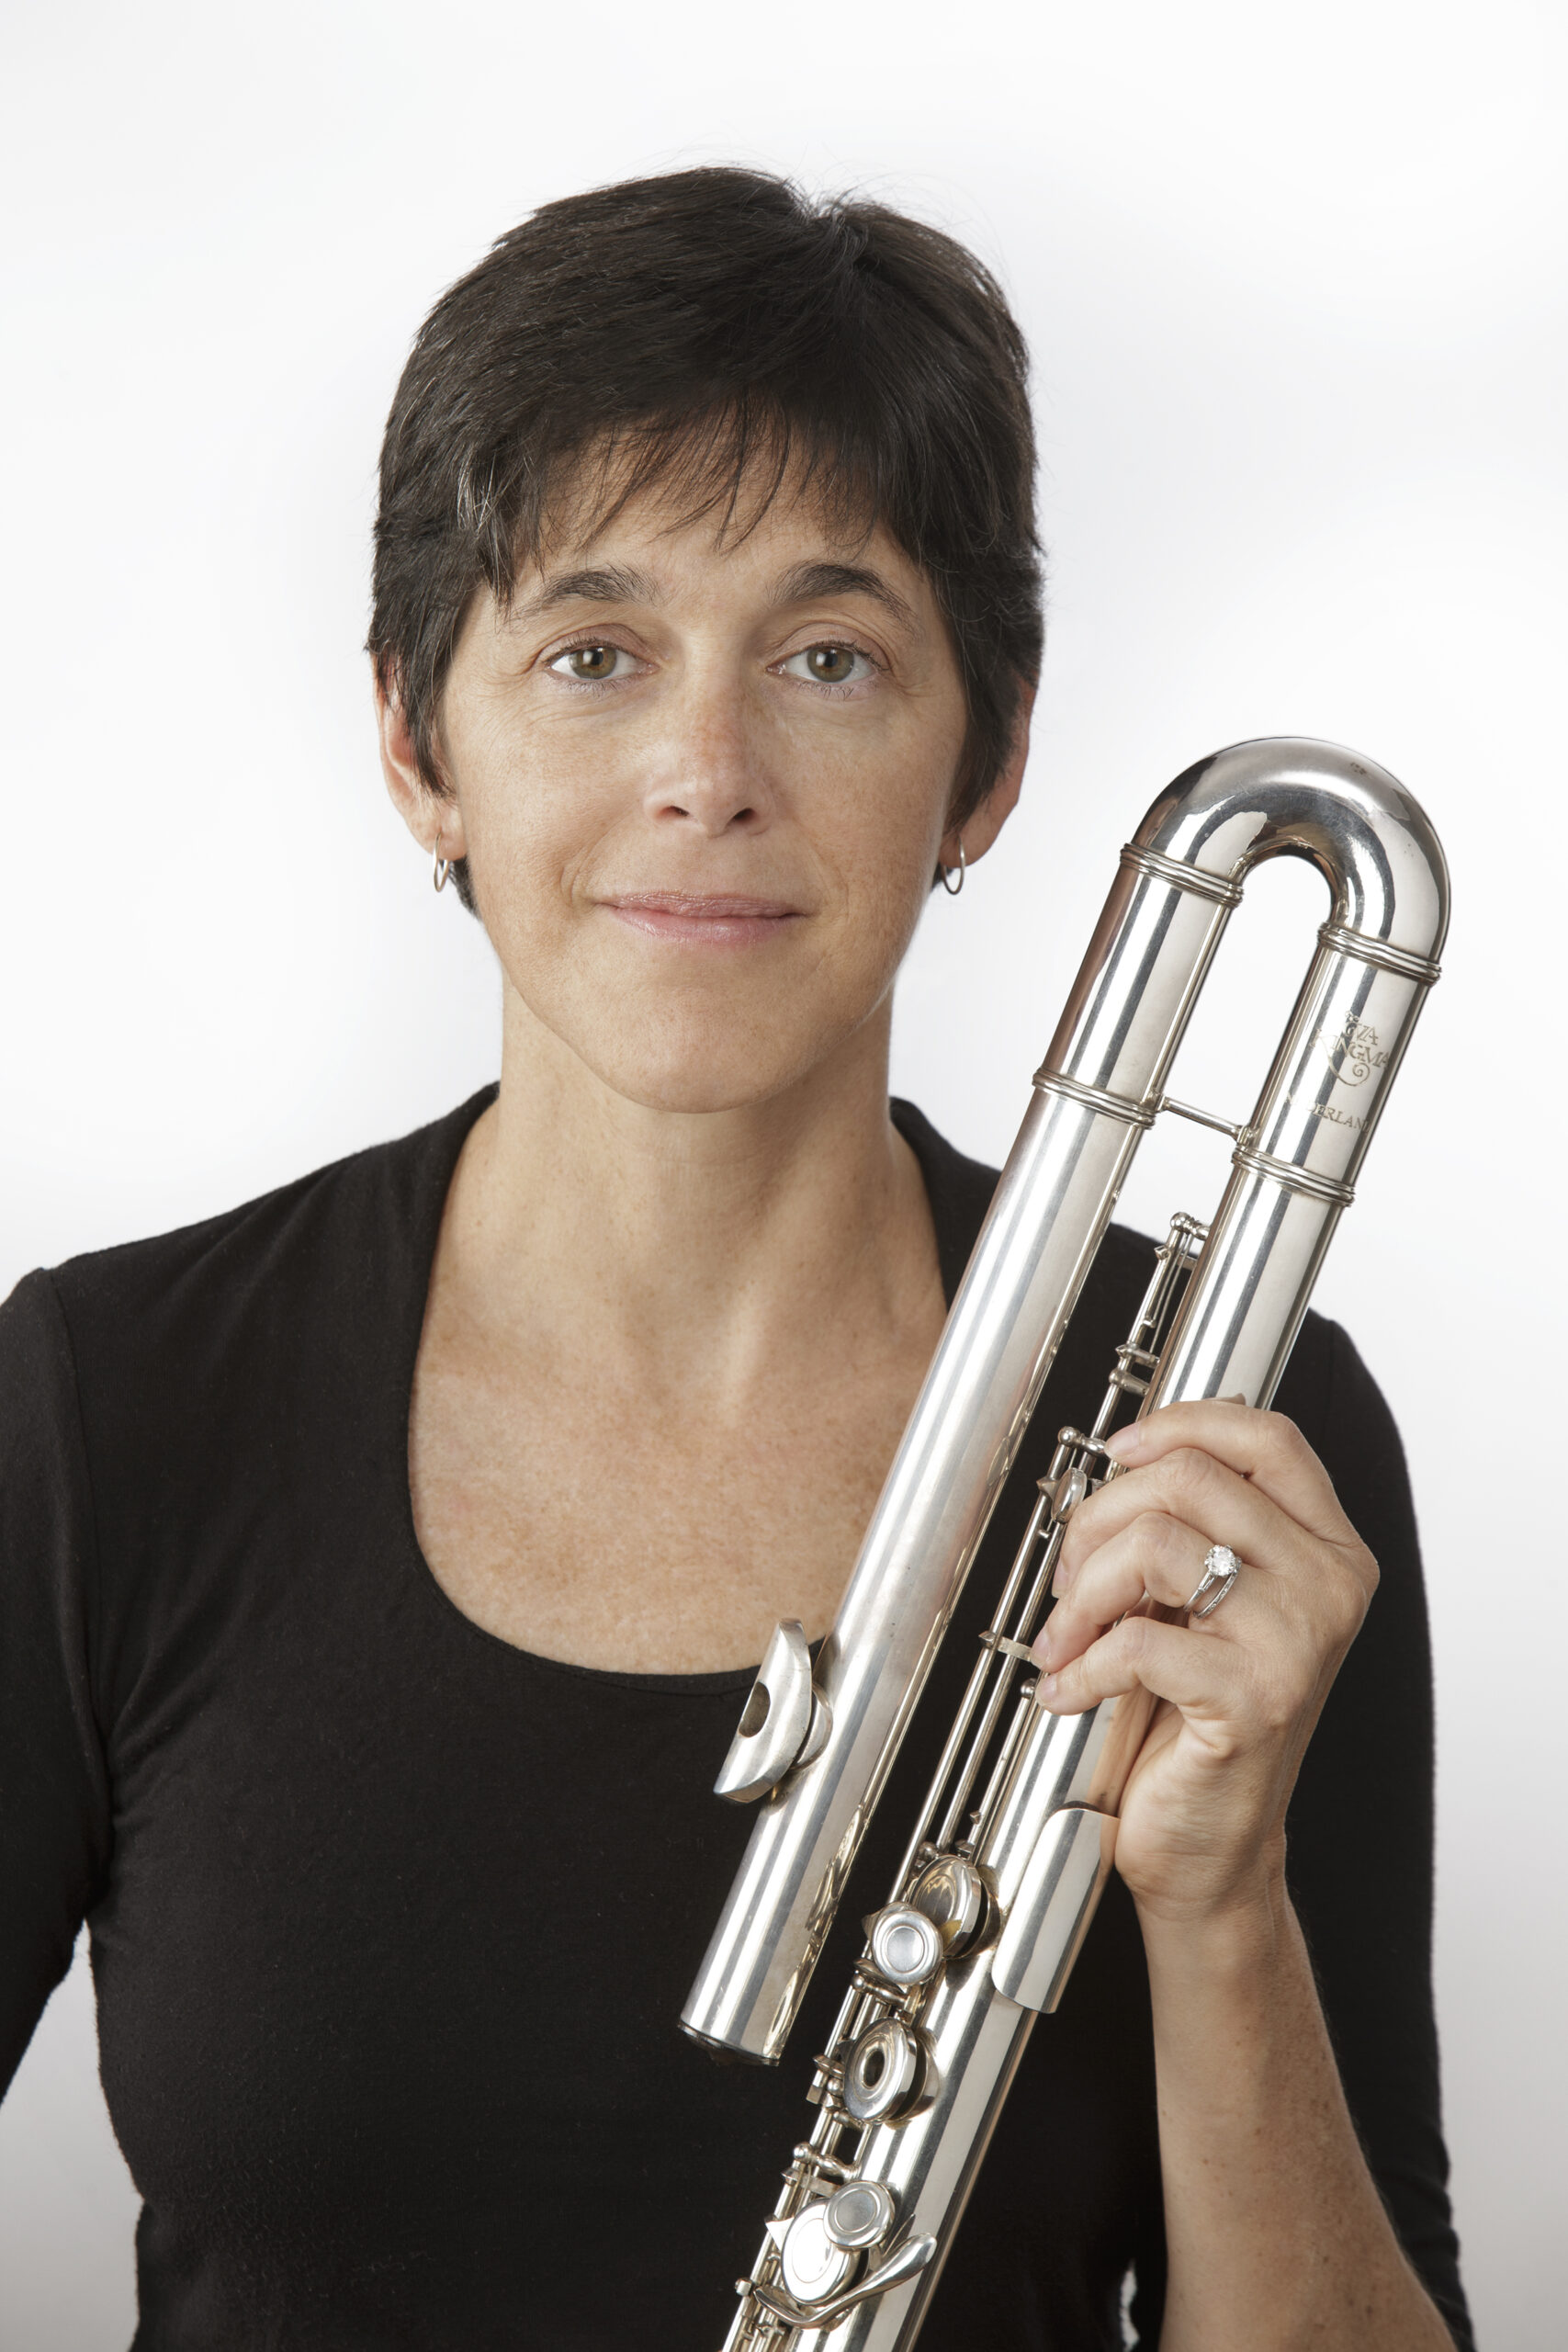 Against a white background, a white woman with short dark hair holds a bass flute